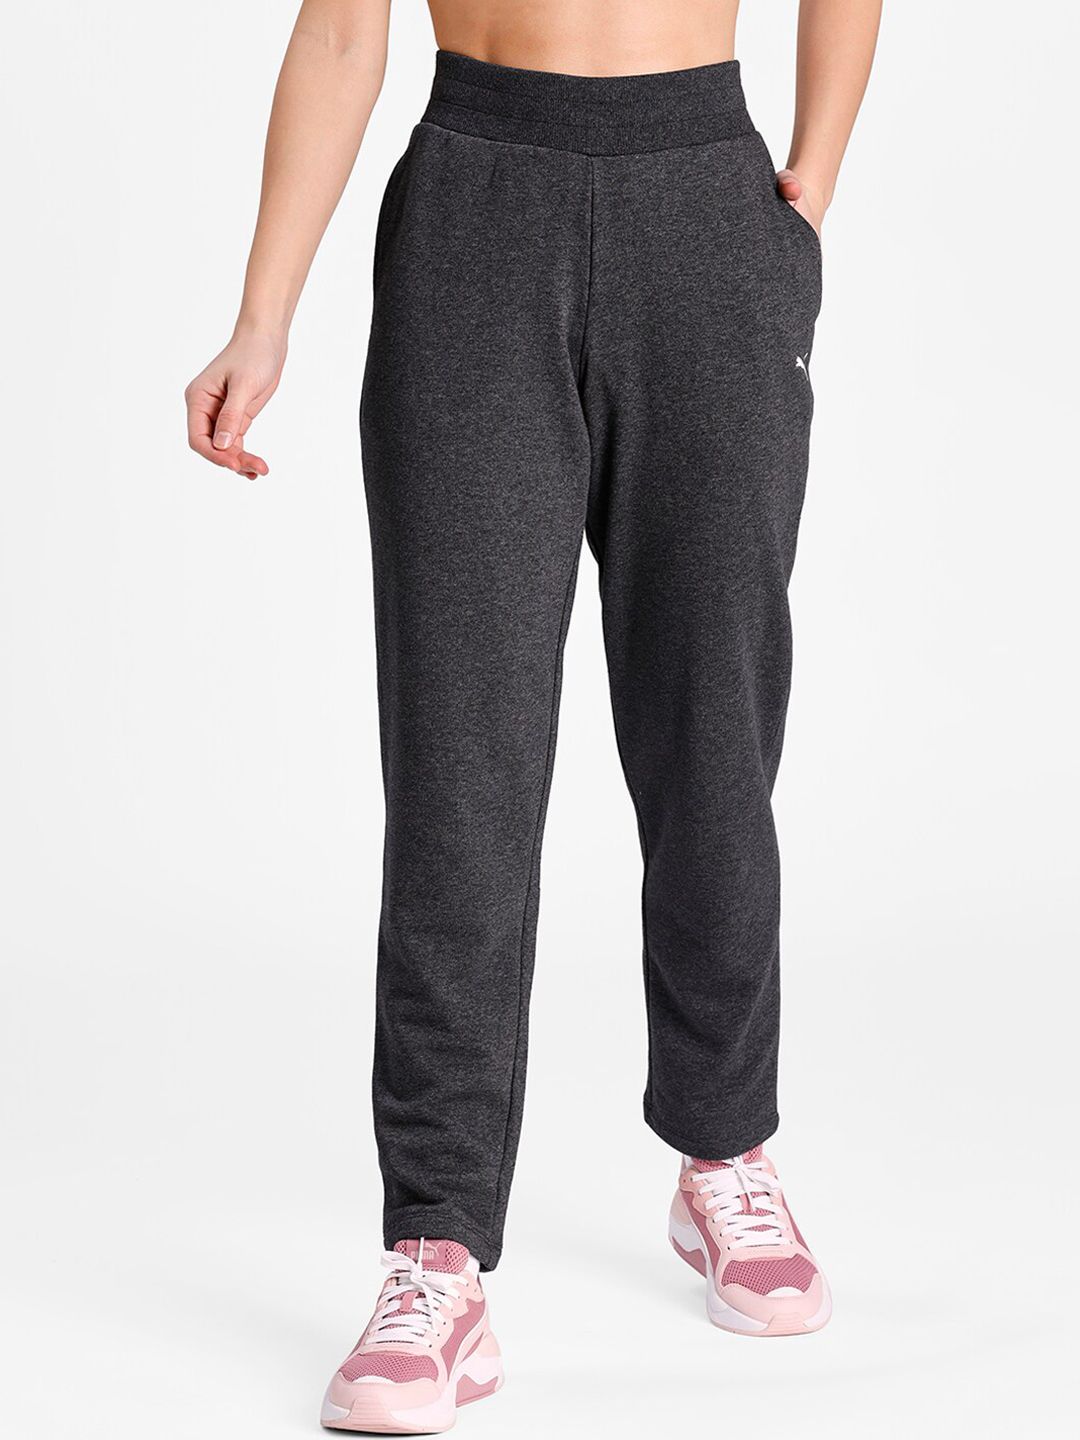 Puma Women Grey Solid ESS SweatSustainable Pants TR Op Price in India